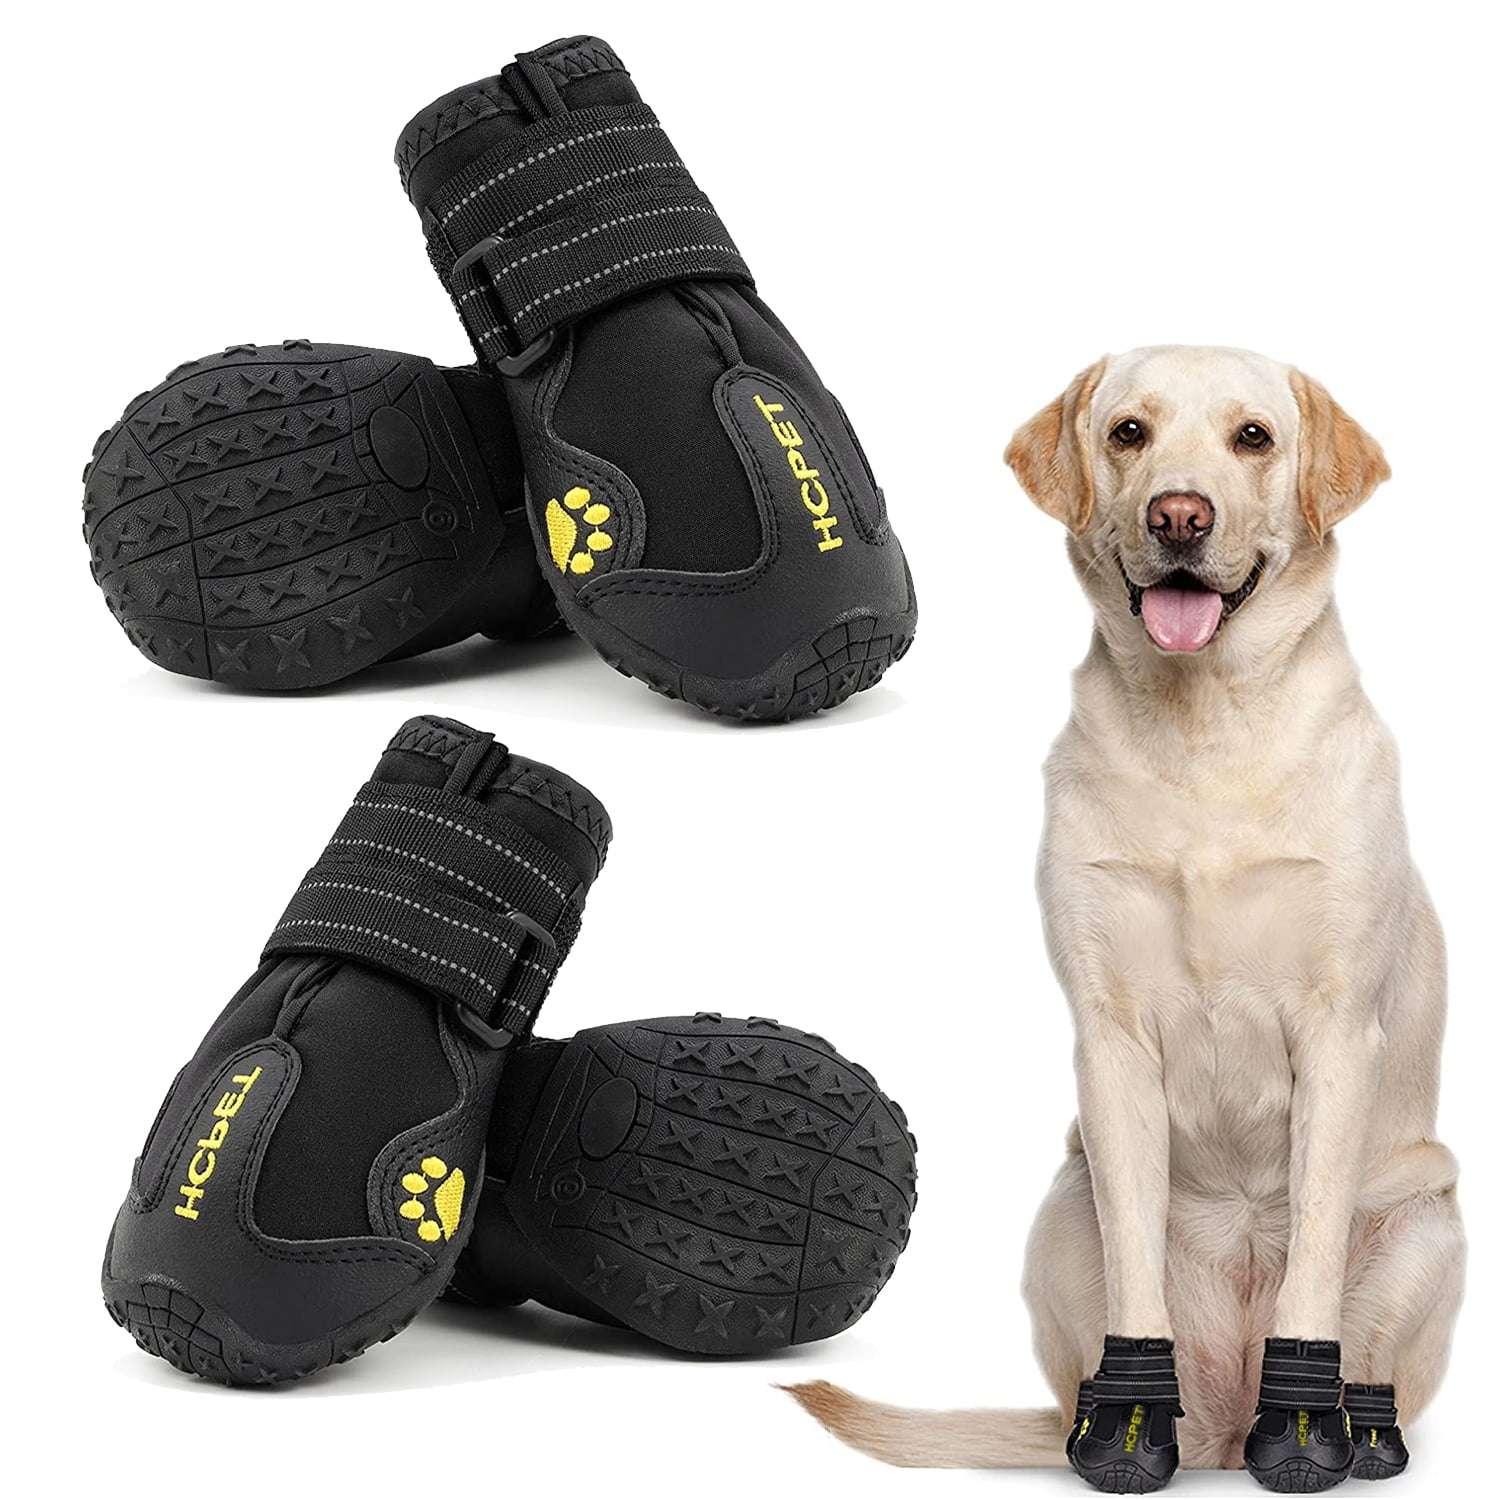 Protective Dog Boots,Set of 4 Waterproof Paw Protector Boots Anti-Slip Dog Rain Shoes